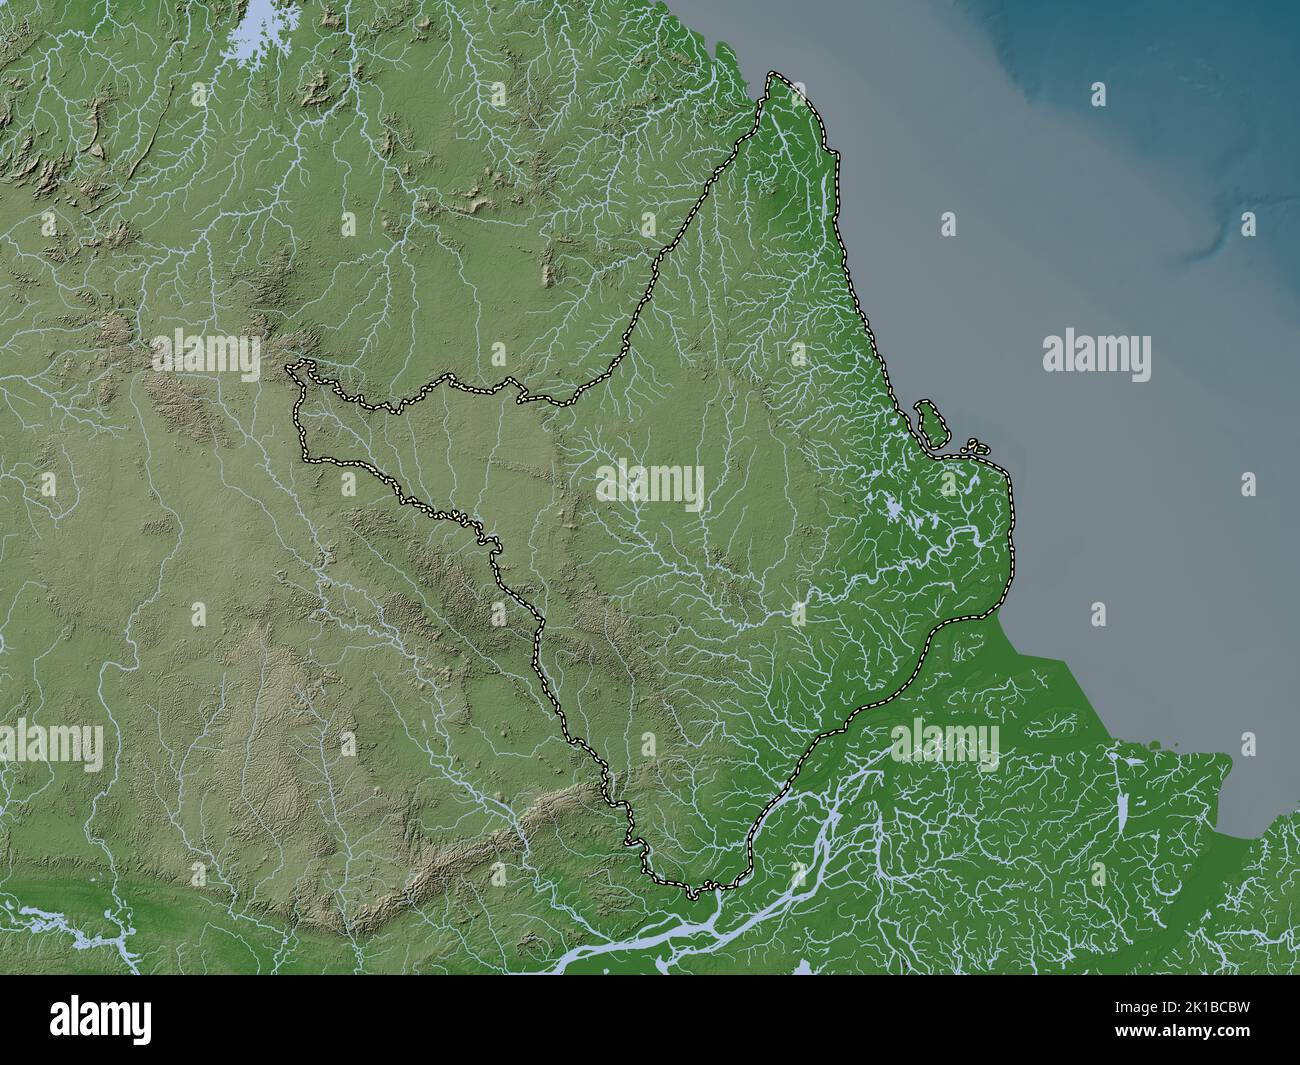 Amapa, state of Brazil. Elevation map colored in wiki style with lakes and rivers Stock Photo